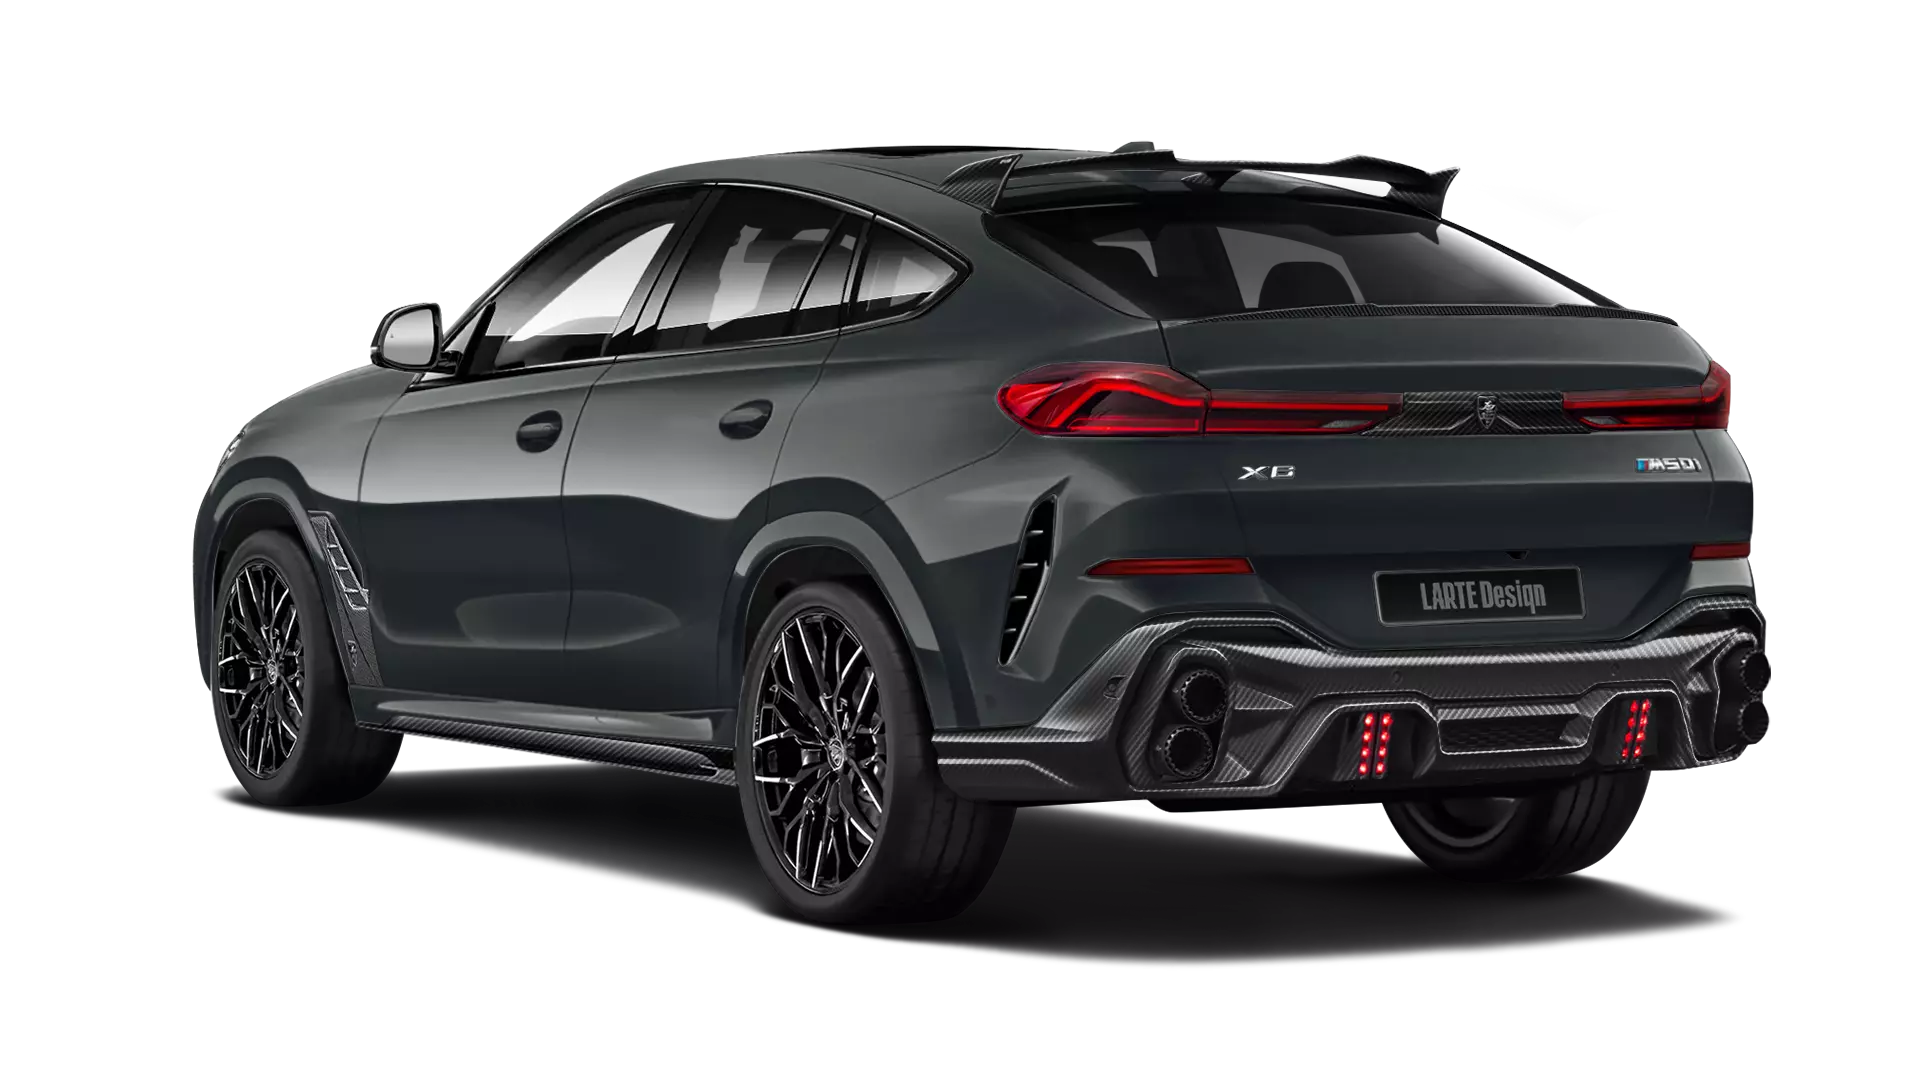 BMW X6 G06 with carbon body kit: back view shown in Dravit Grey